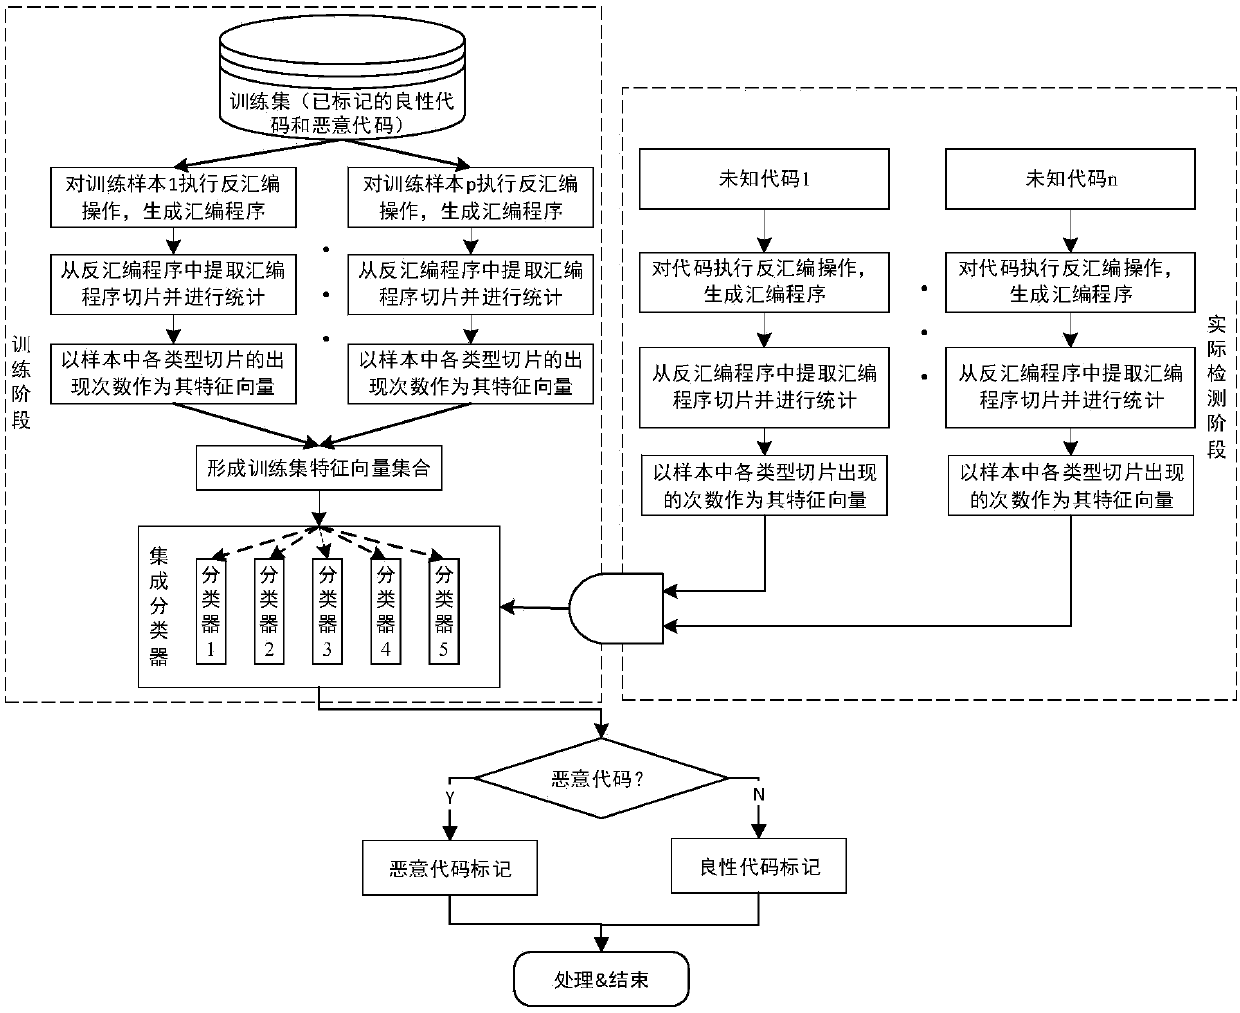 Efficient detection method for massive malicious codes